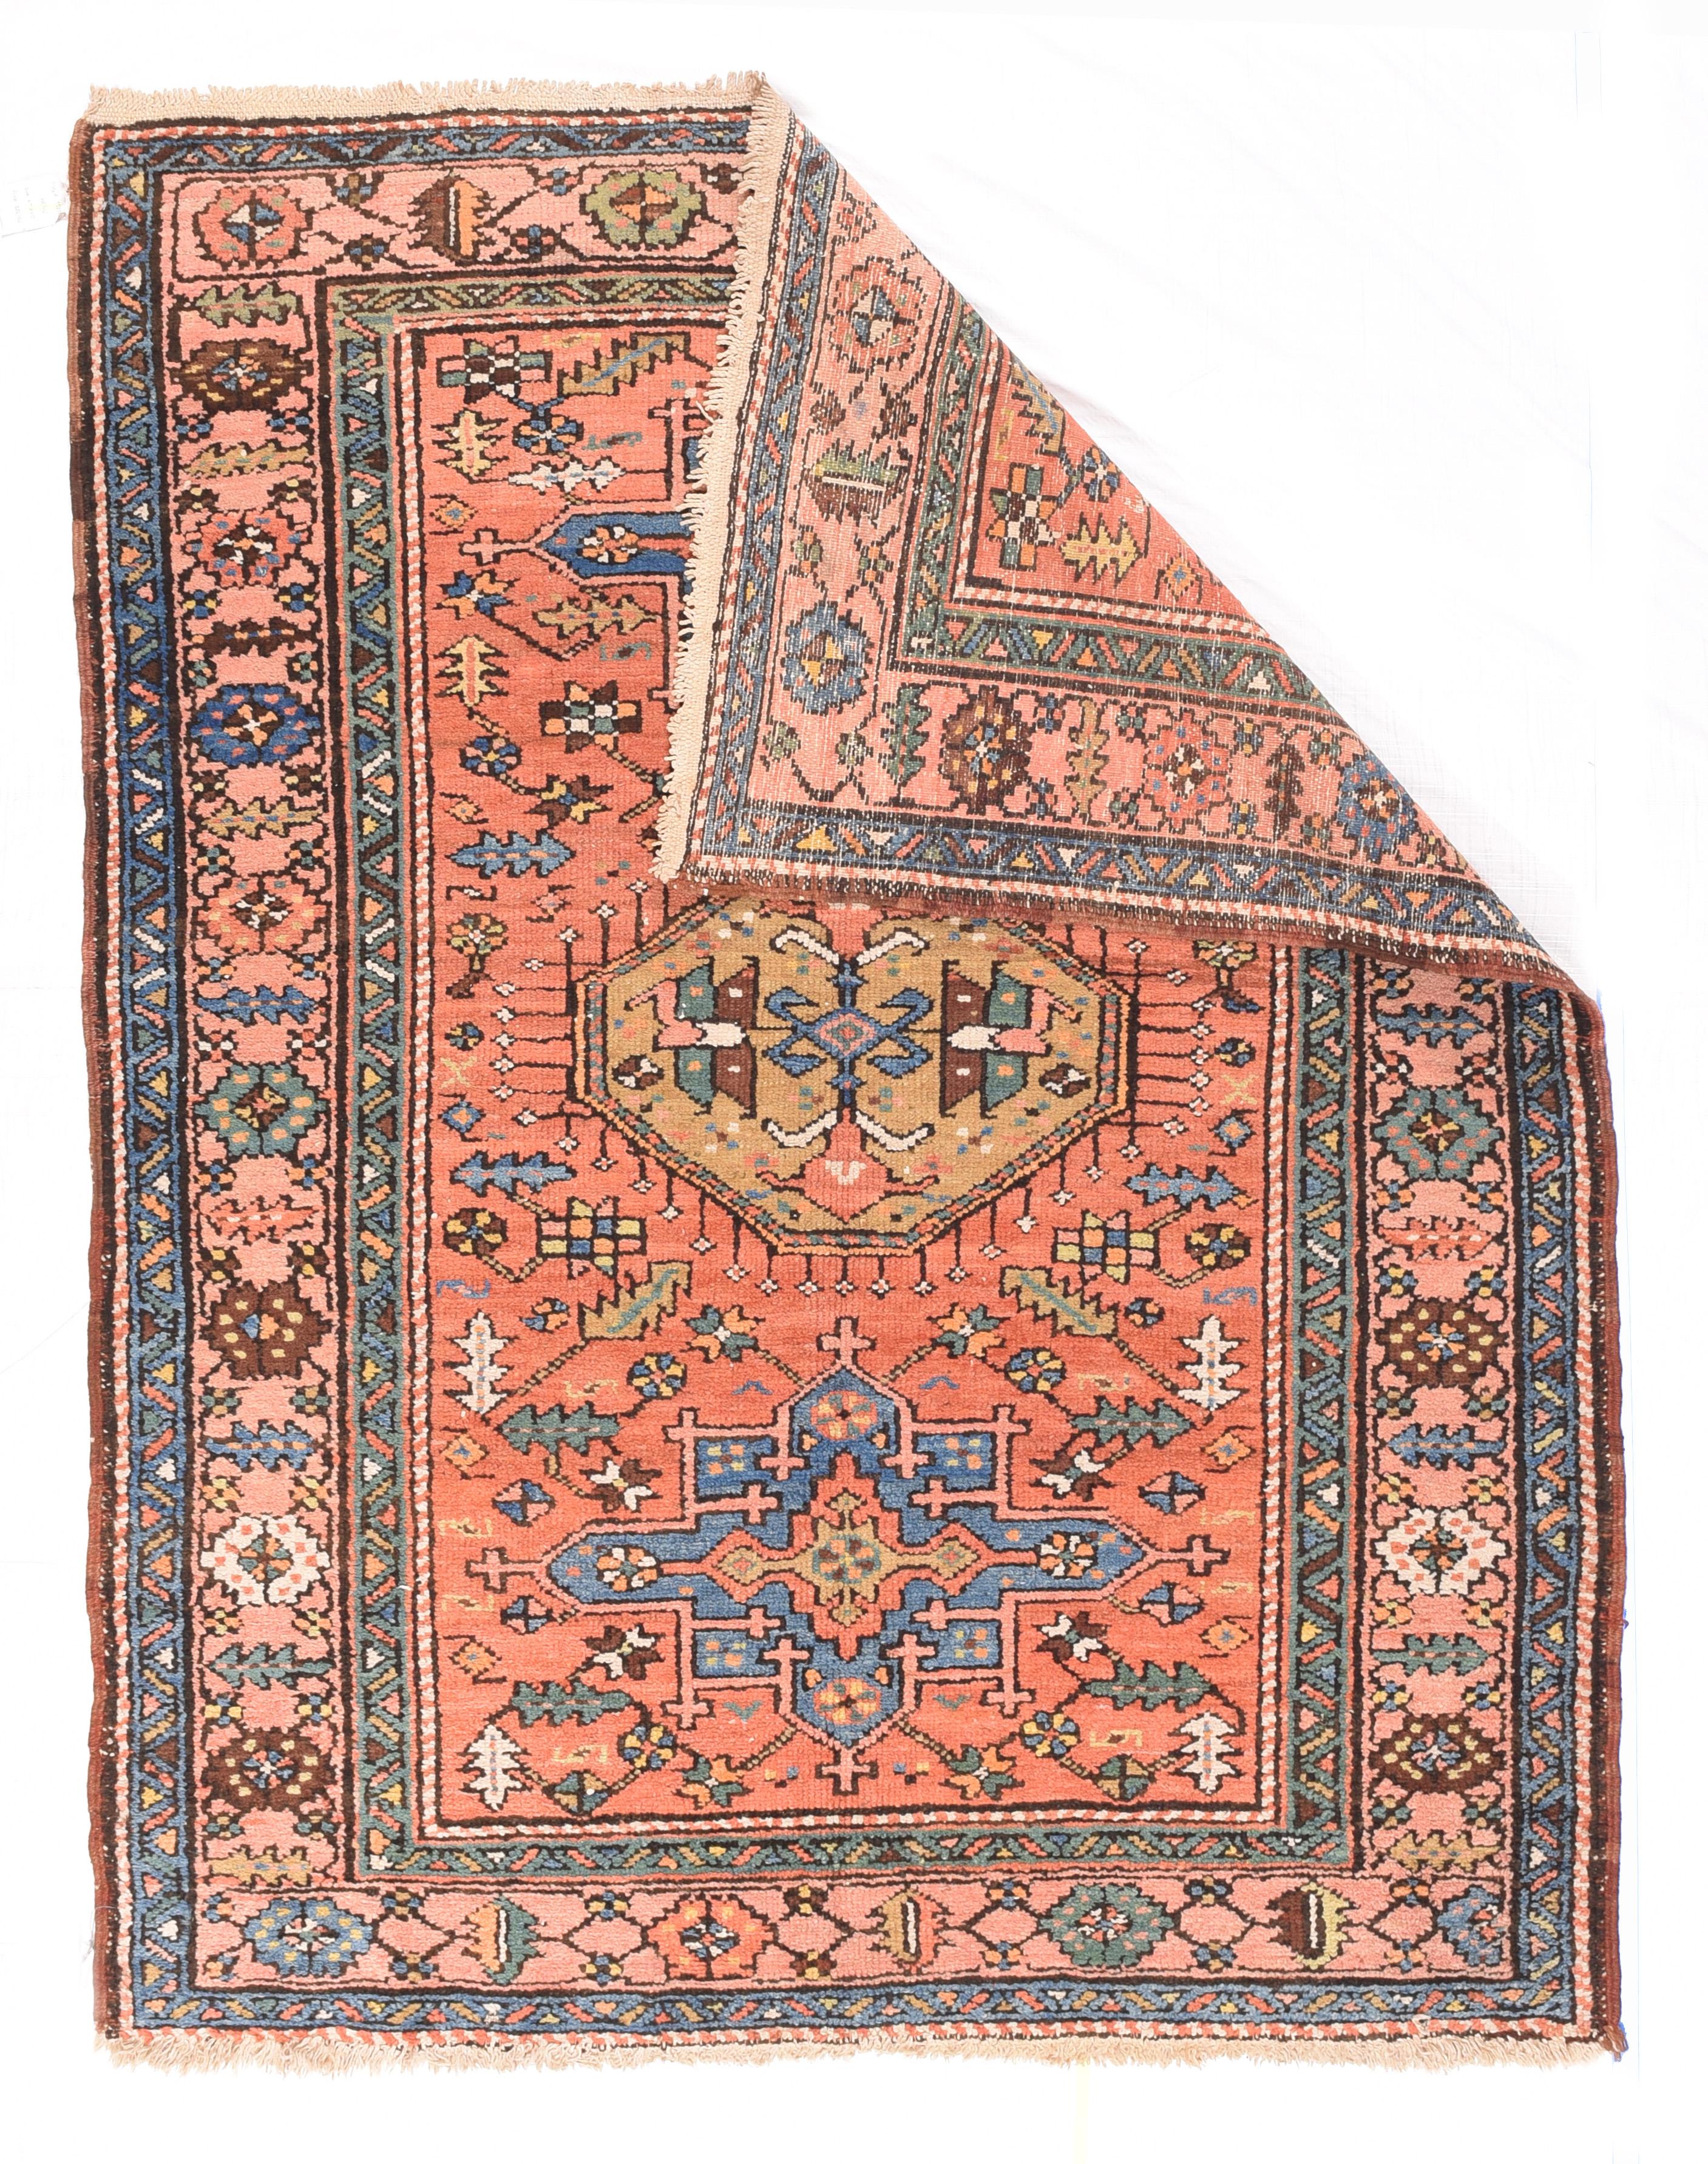 Antique Heriz Rug 4'7'' x 6'. Characteristic Karaja medallions, square/octogrammes (in light blue) and hooked or fringed hexagons or octagons (here yellow with four radiating palmettes), it's a Karaja. The jagged leaf field infill continues into the